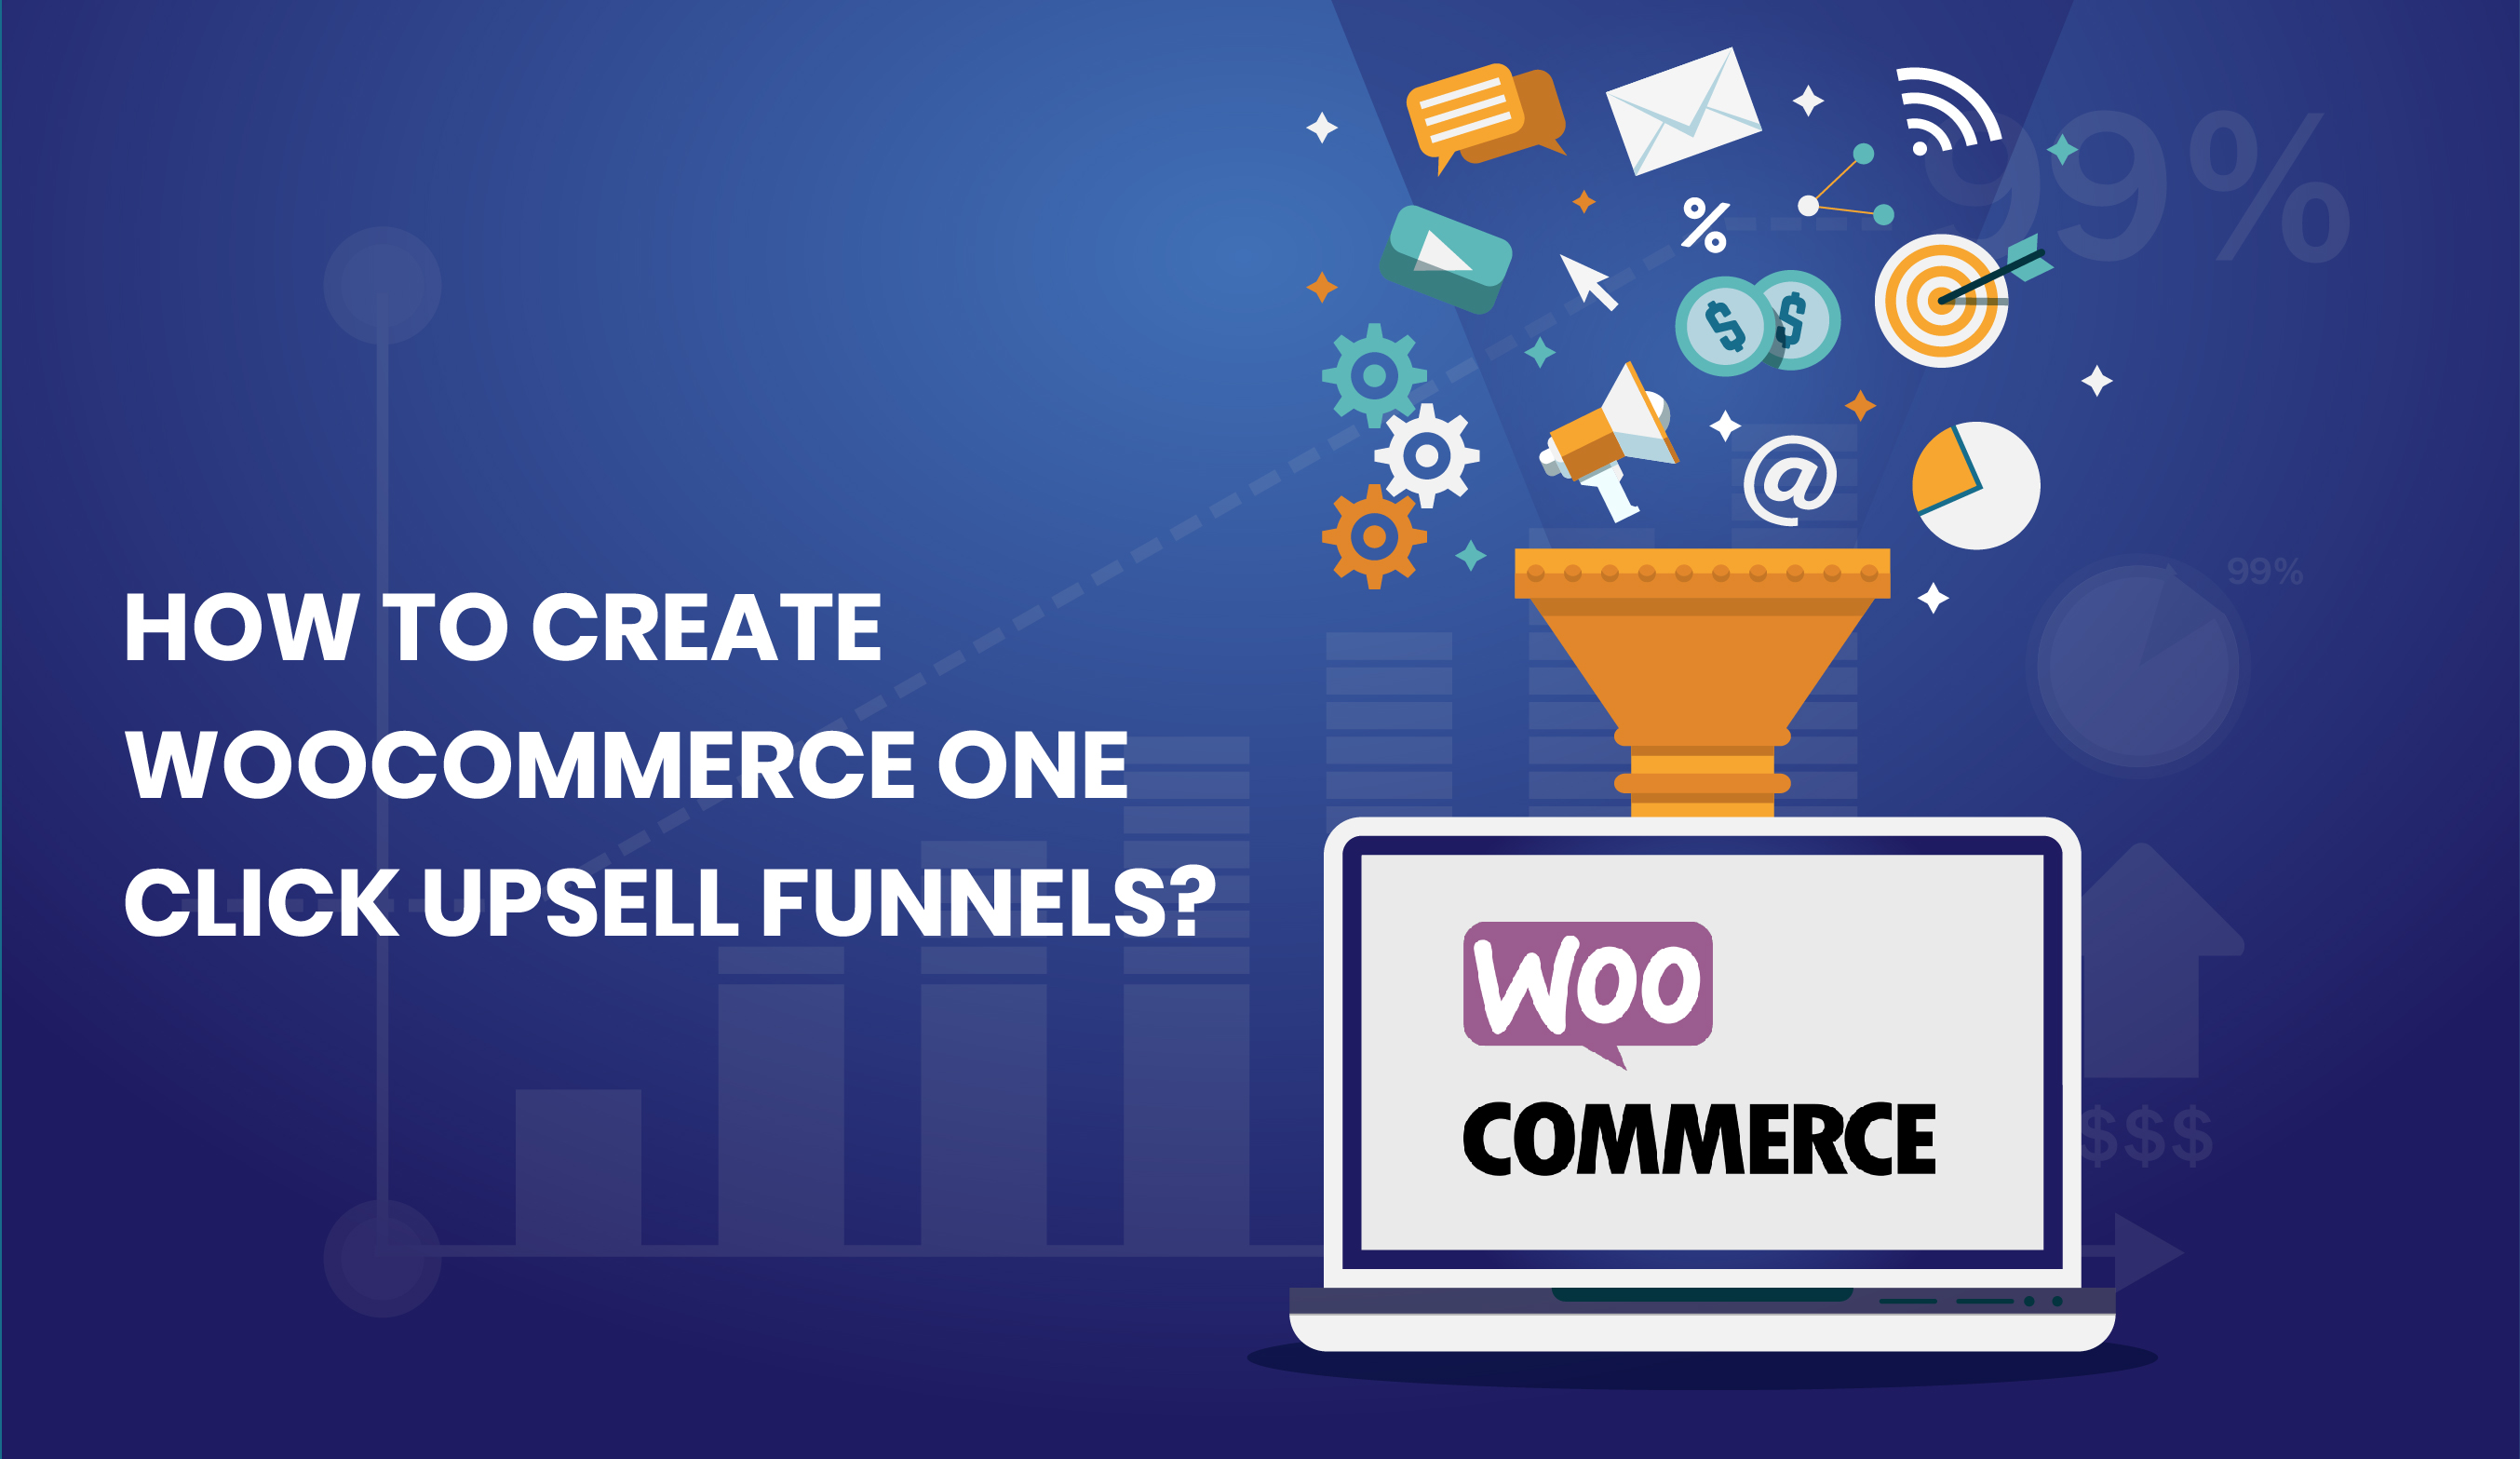 How to create WooCommerce One Click Upsell Funnels?